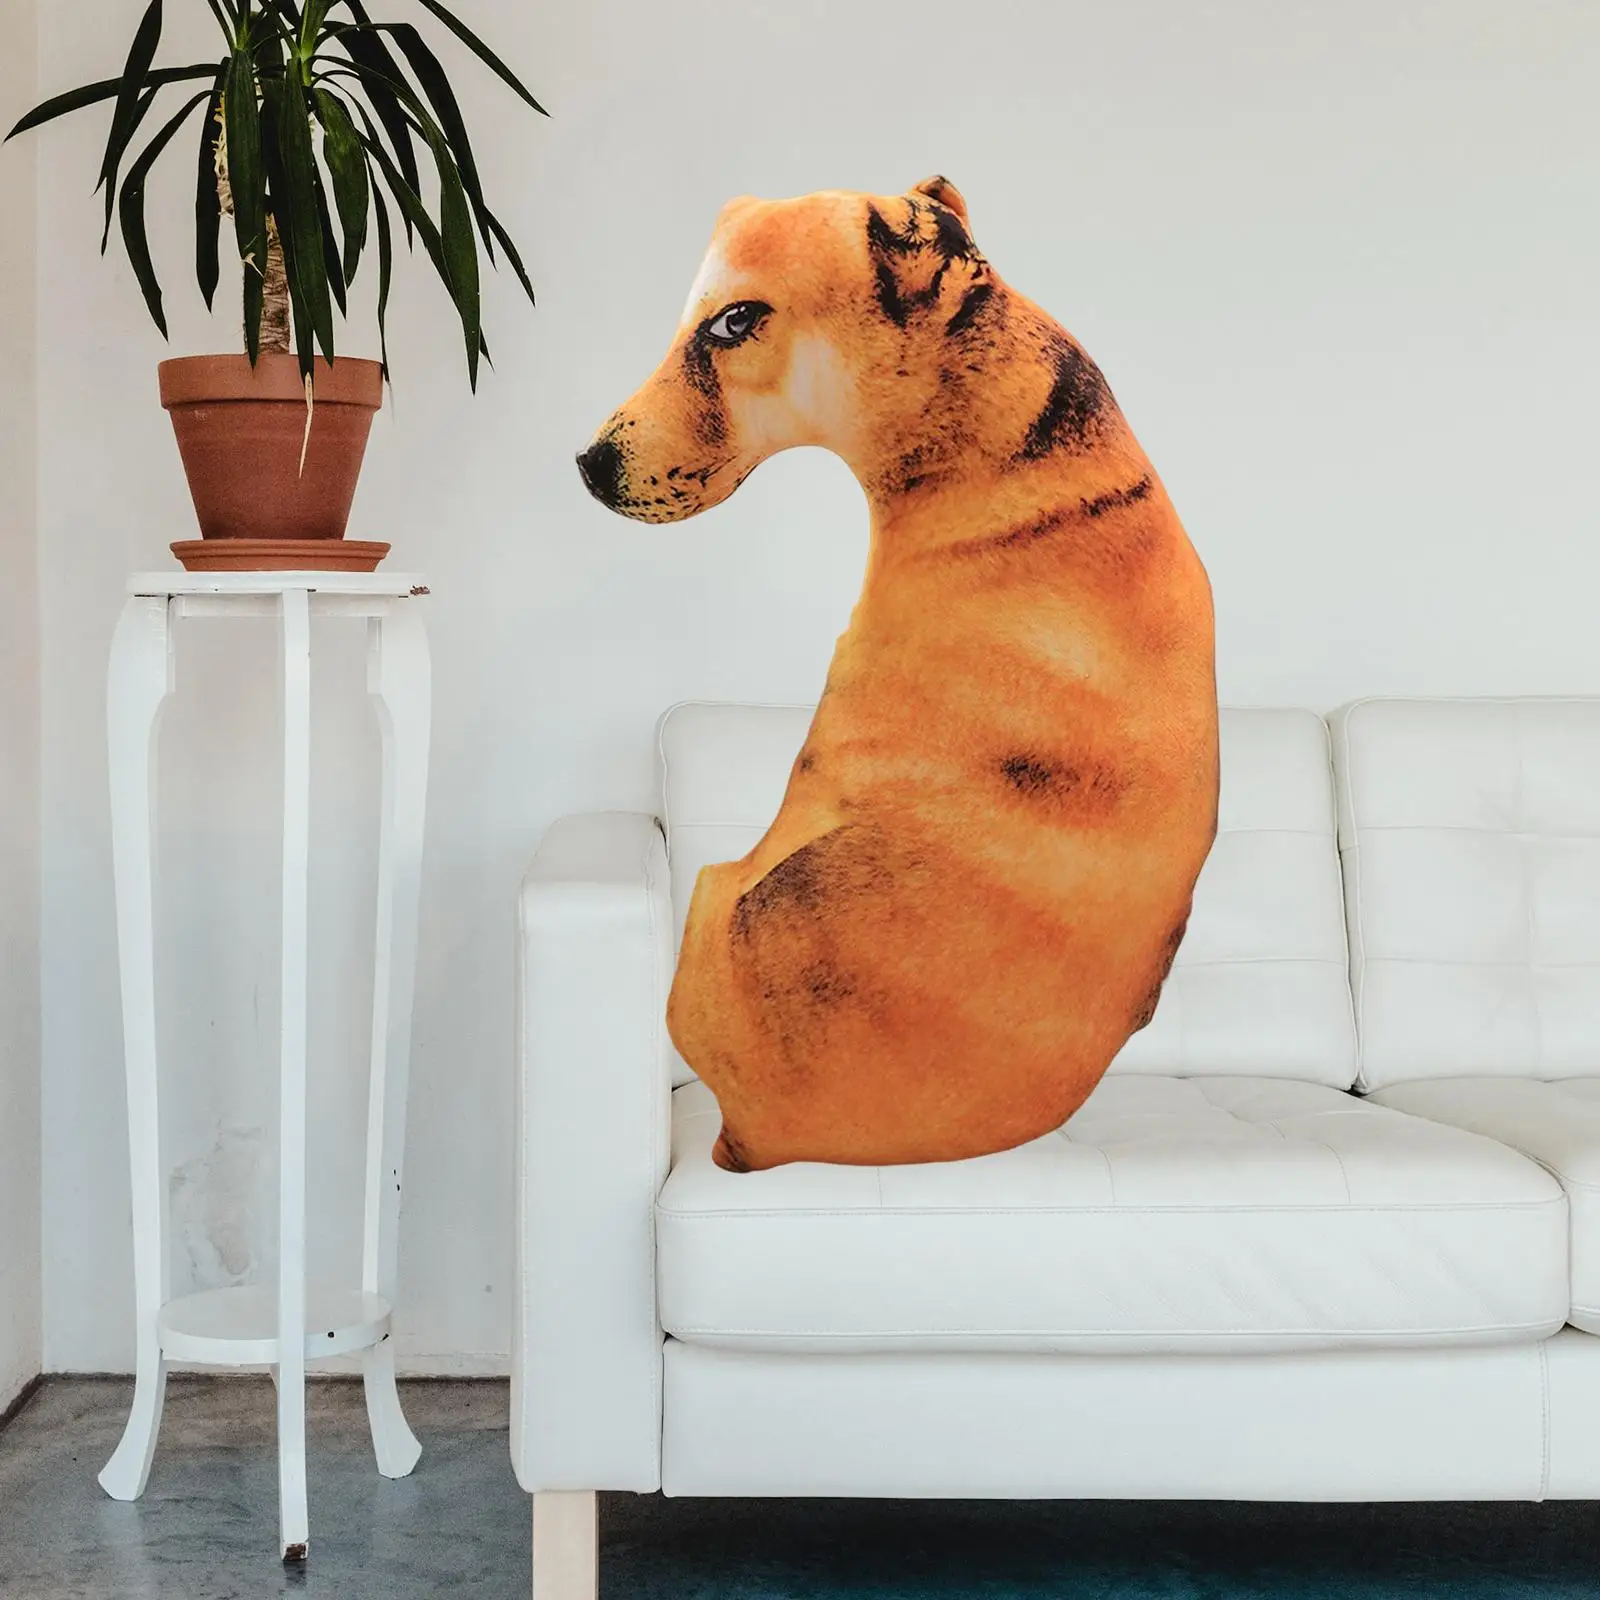 3D Dog Printed Pillow Cushion Toy Cushion 35inch for Couch, Bed, Car, and Office Outside Wrapped by Short Plush Funny Washable